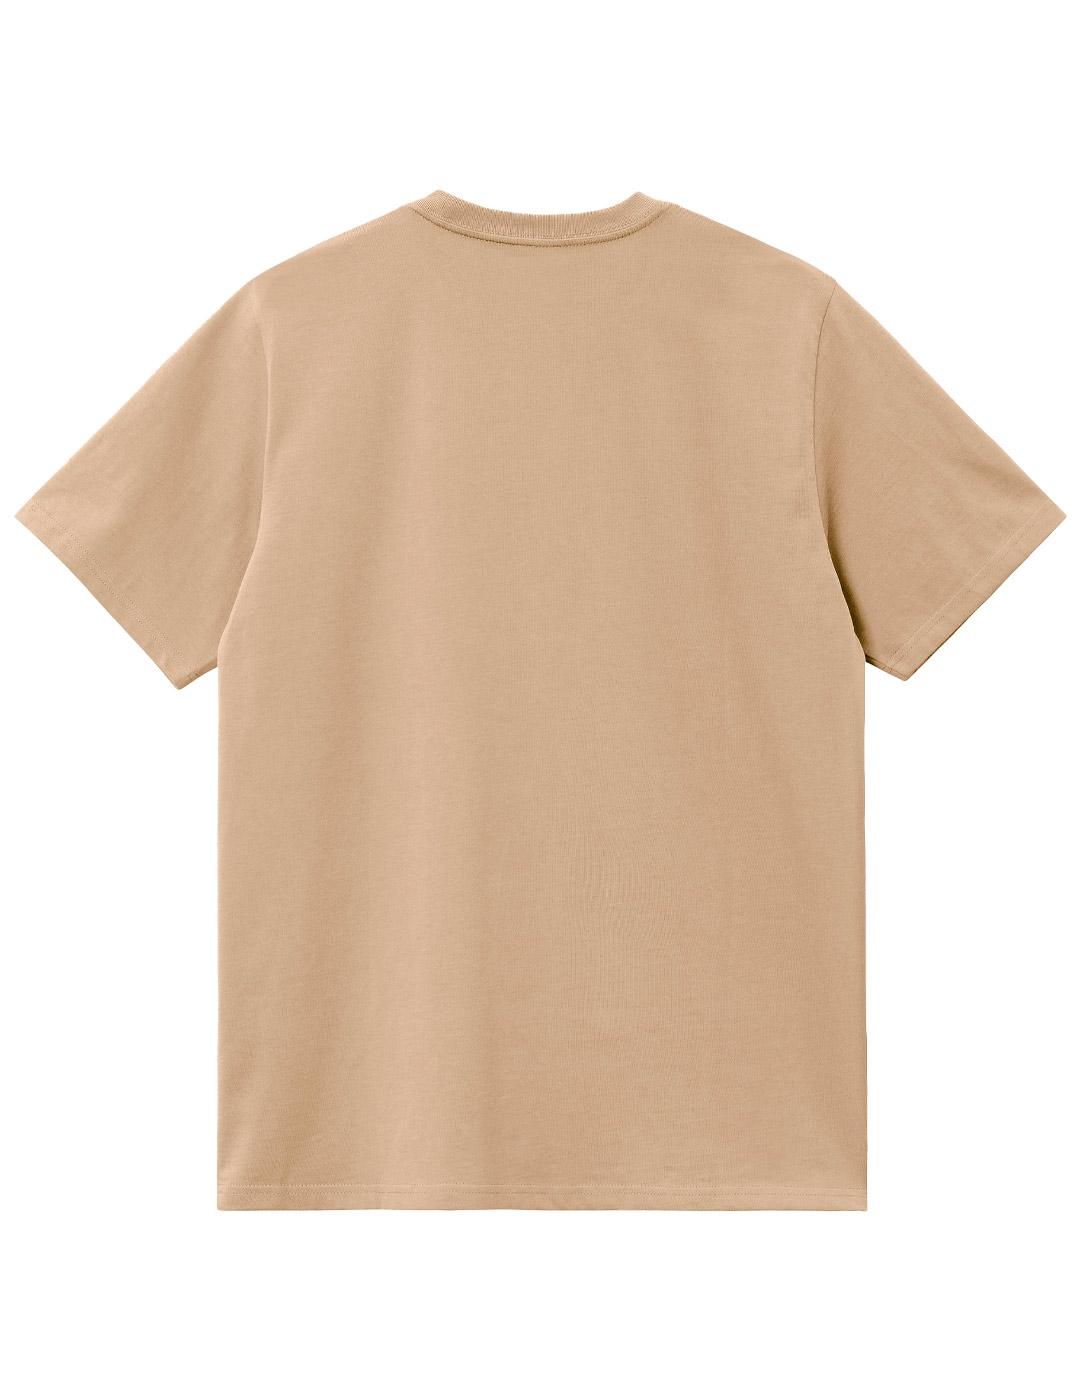 T-Shirt Carhartt Wip Chase Camel